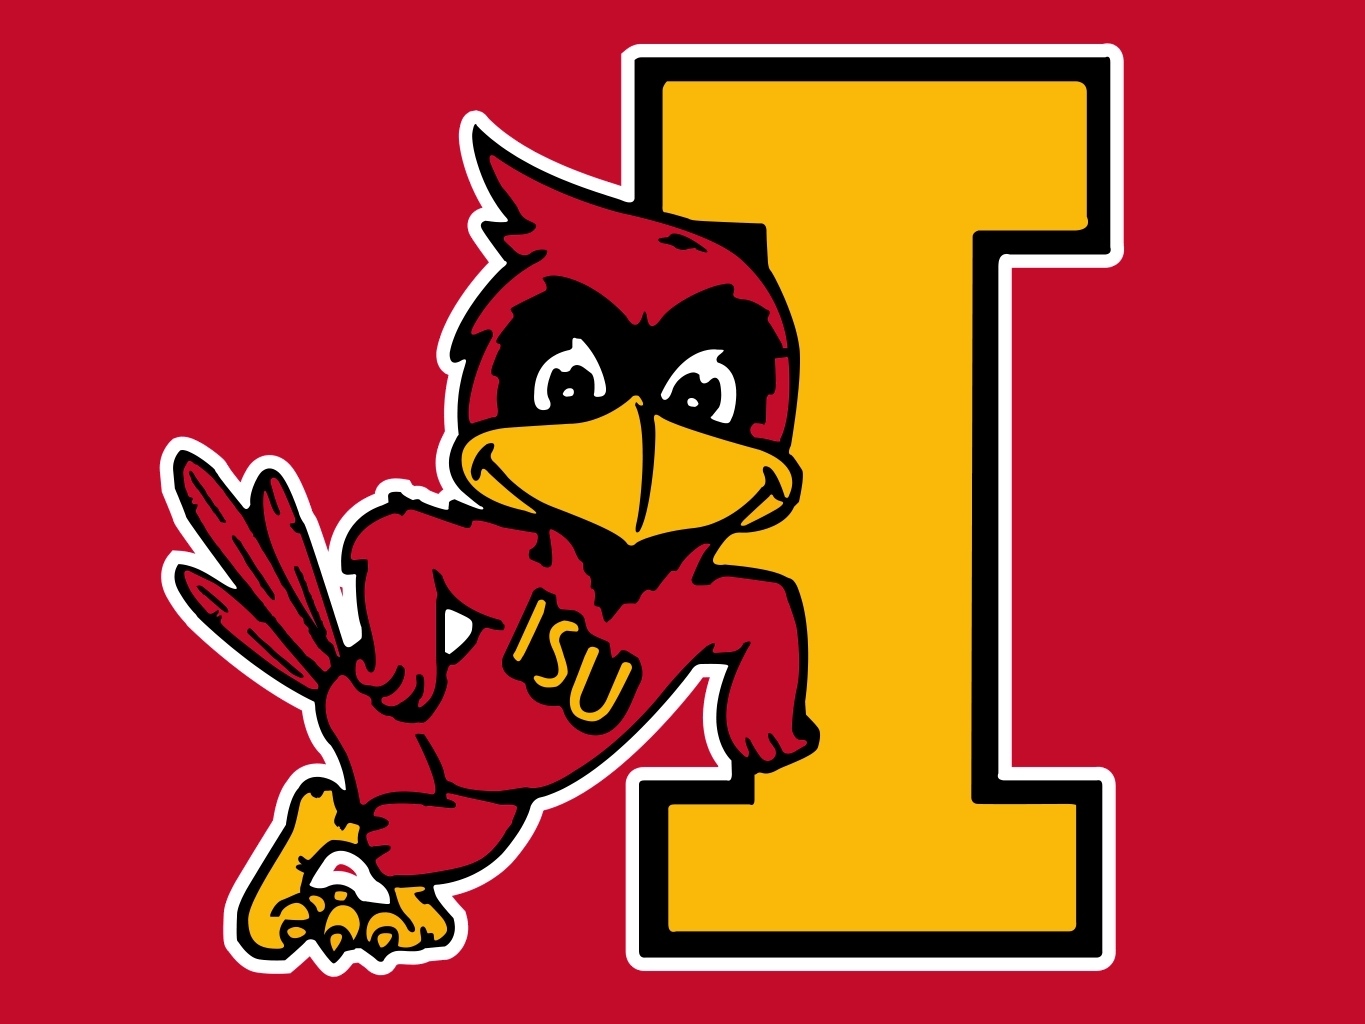 Free download Iowa State Cyclones [1365x1024] for your Desktop, Mobile & Tablet. Explore Iowa State University Wallpaper. University of Iowa Desktop Wallpaper, Iowa State Cyclones Basketball Wallpaper